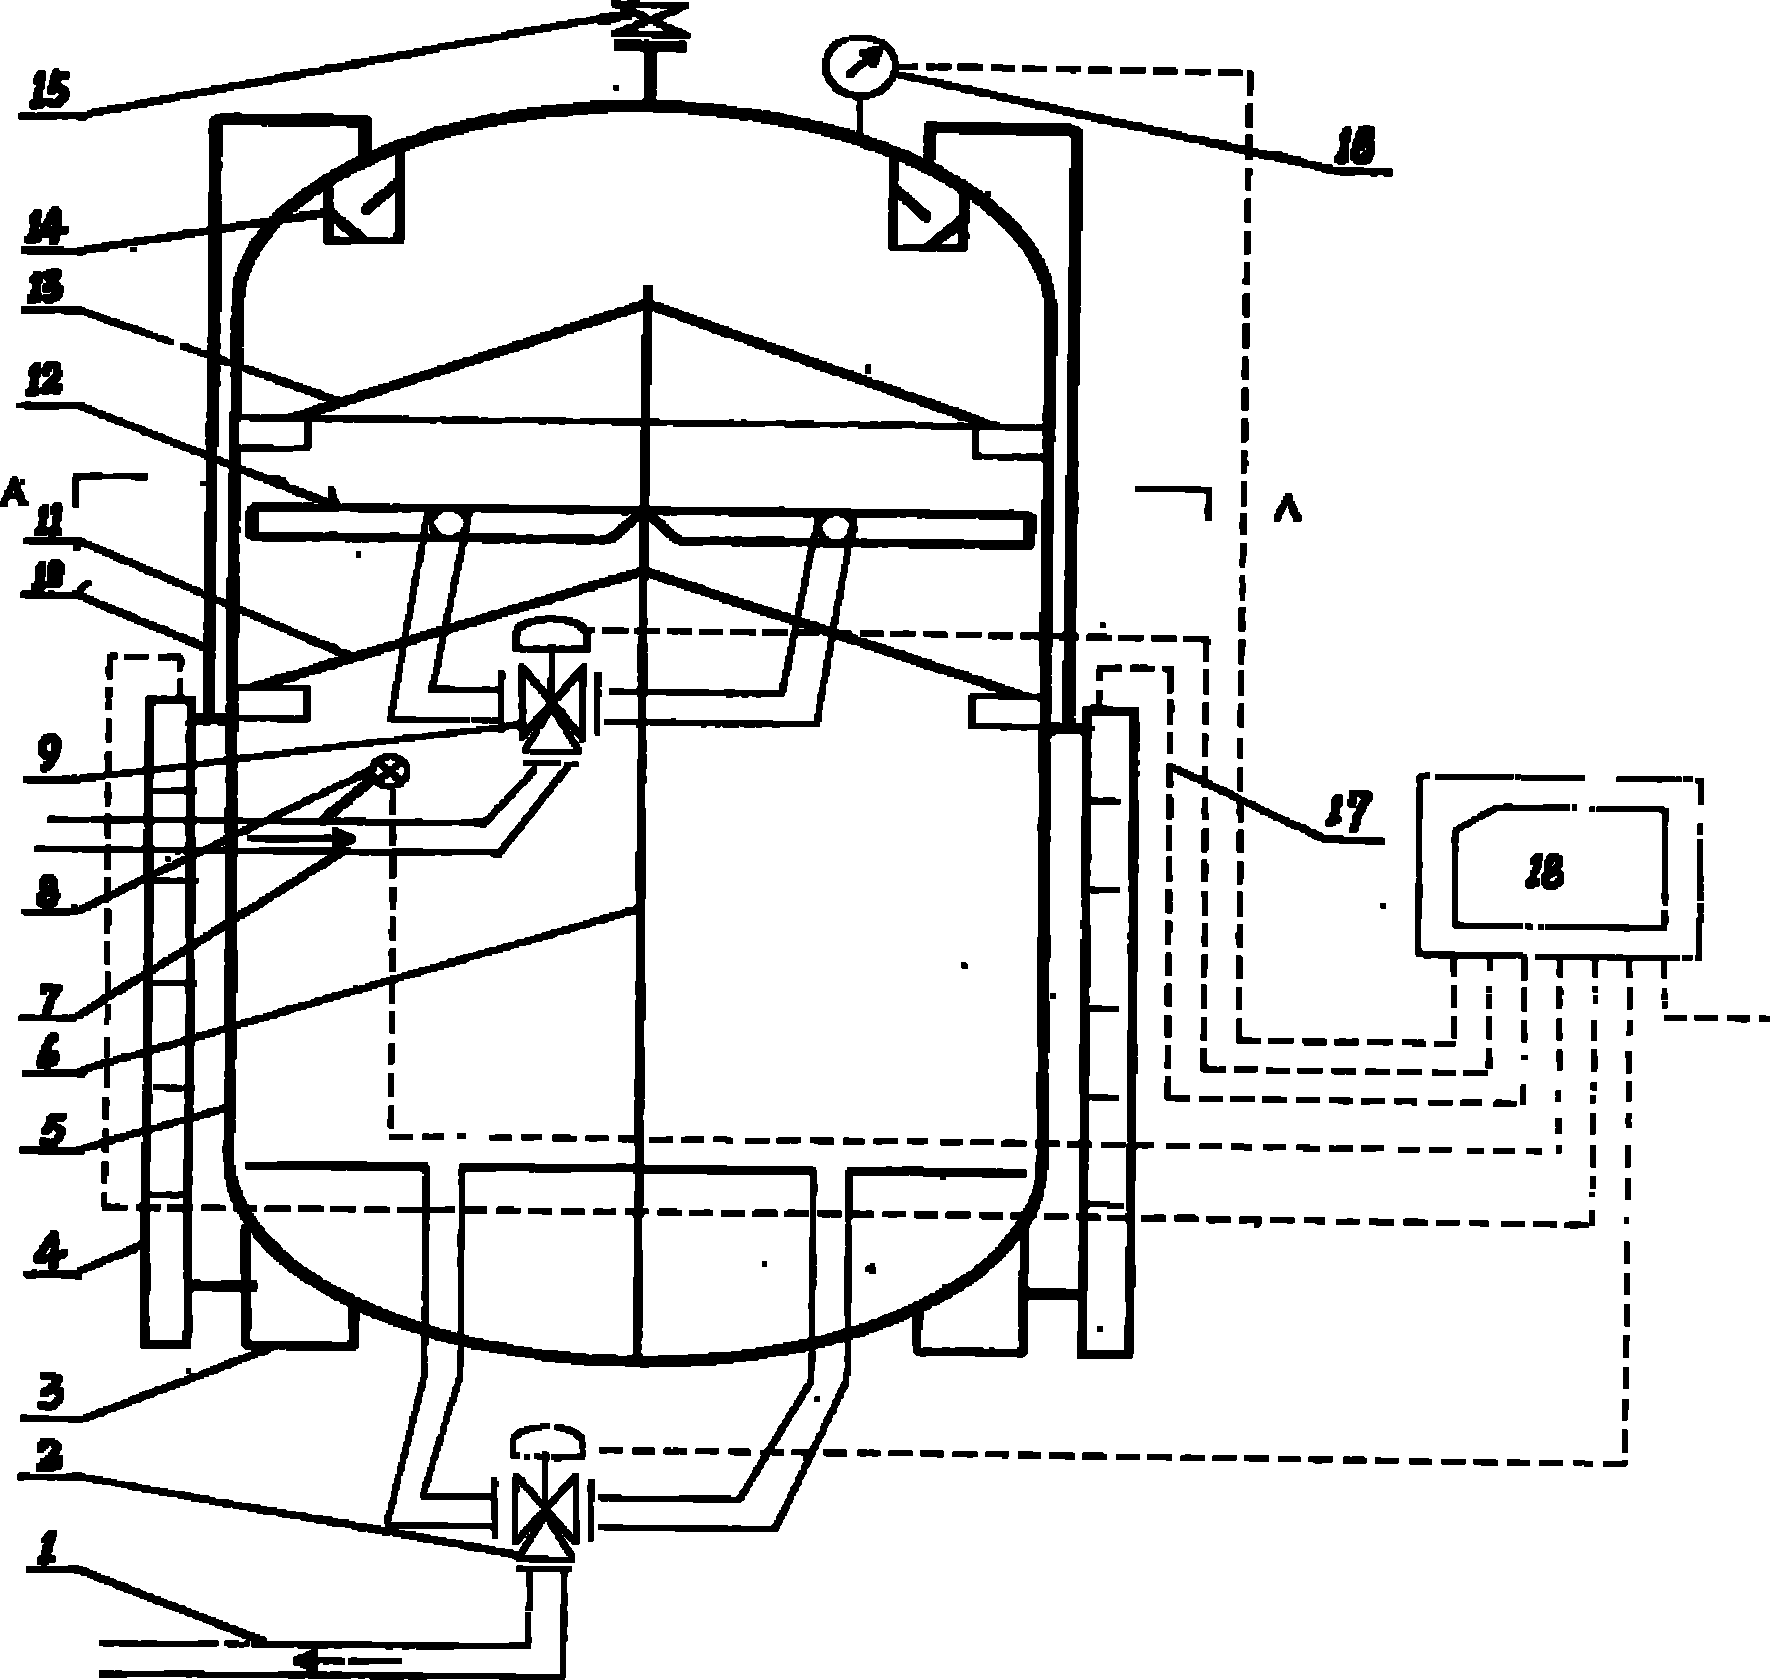 Crude-oil automatic continuous measuring device